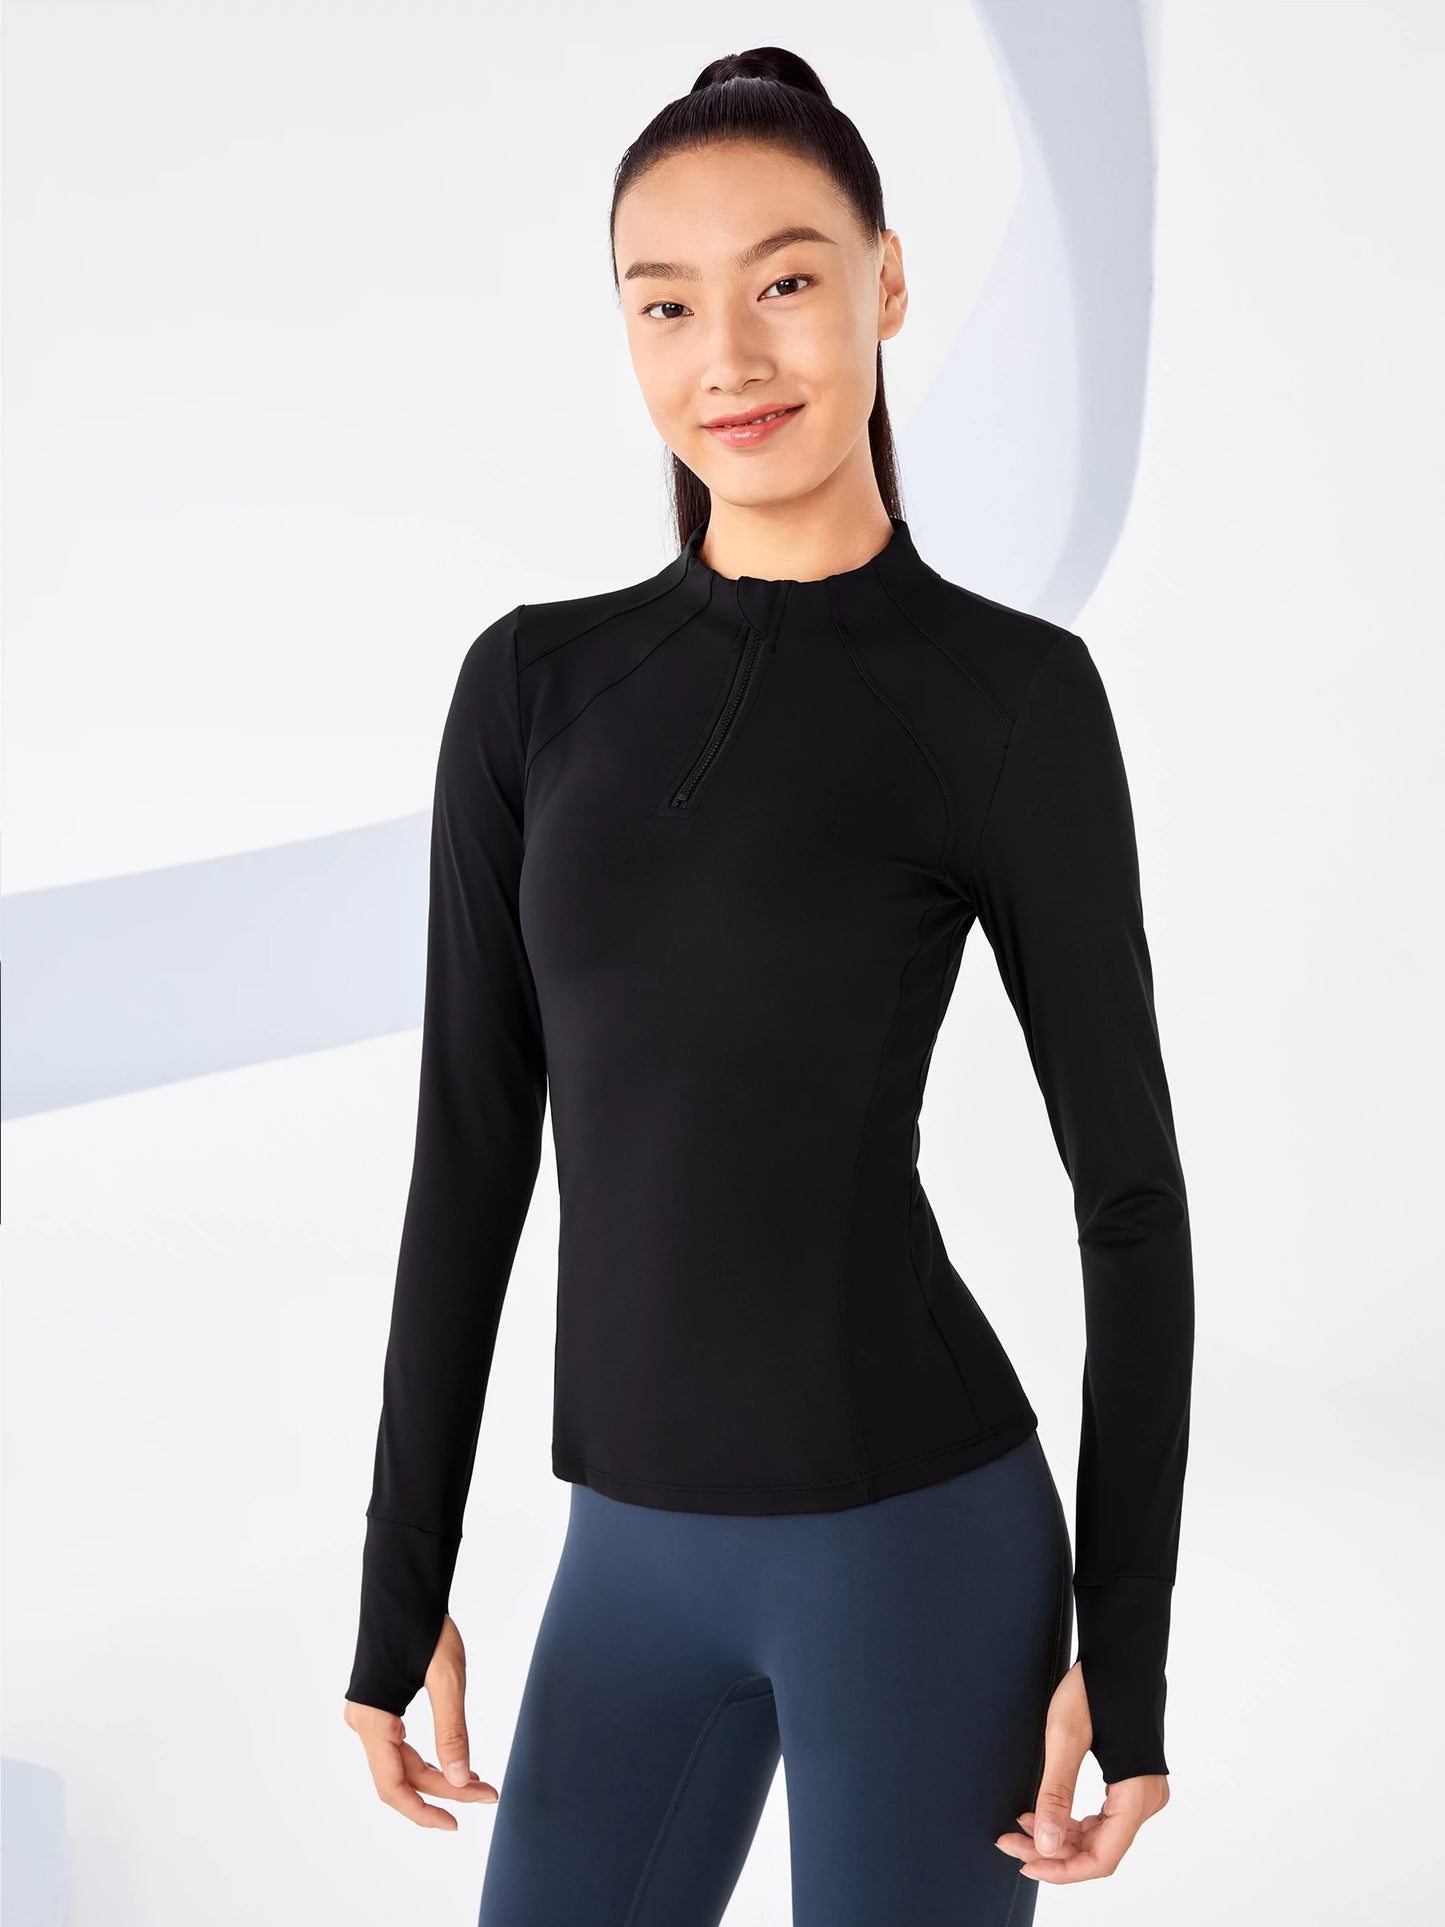 Women's Long-Sleeved Running Quick Drying Clothes Professional Training Yoga Clothes